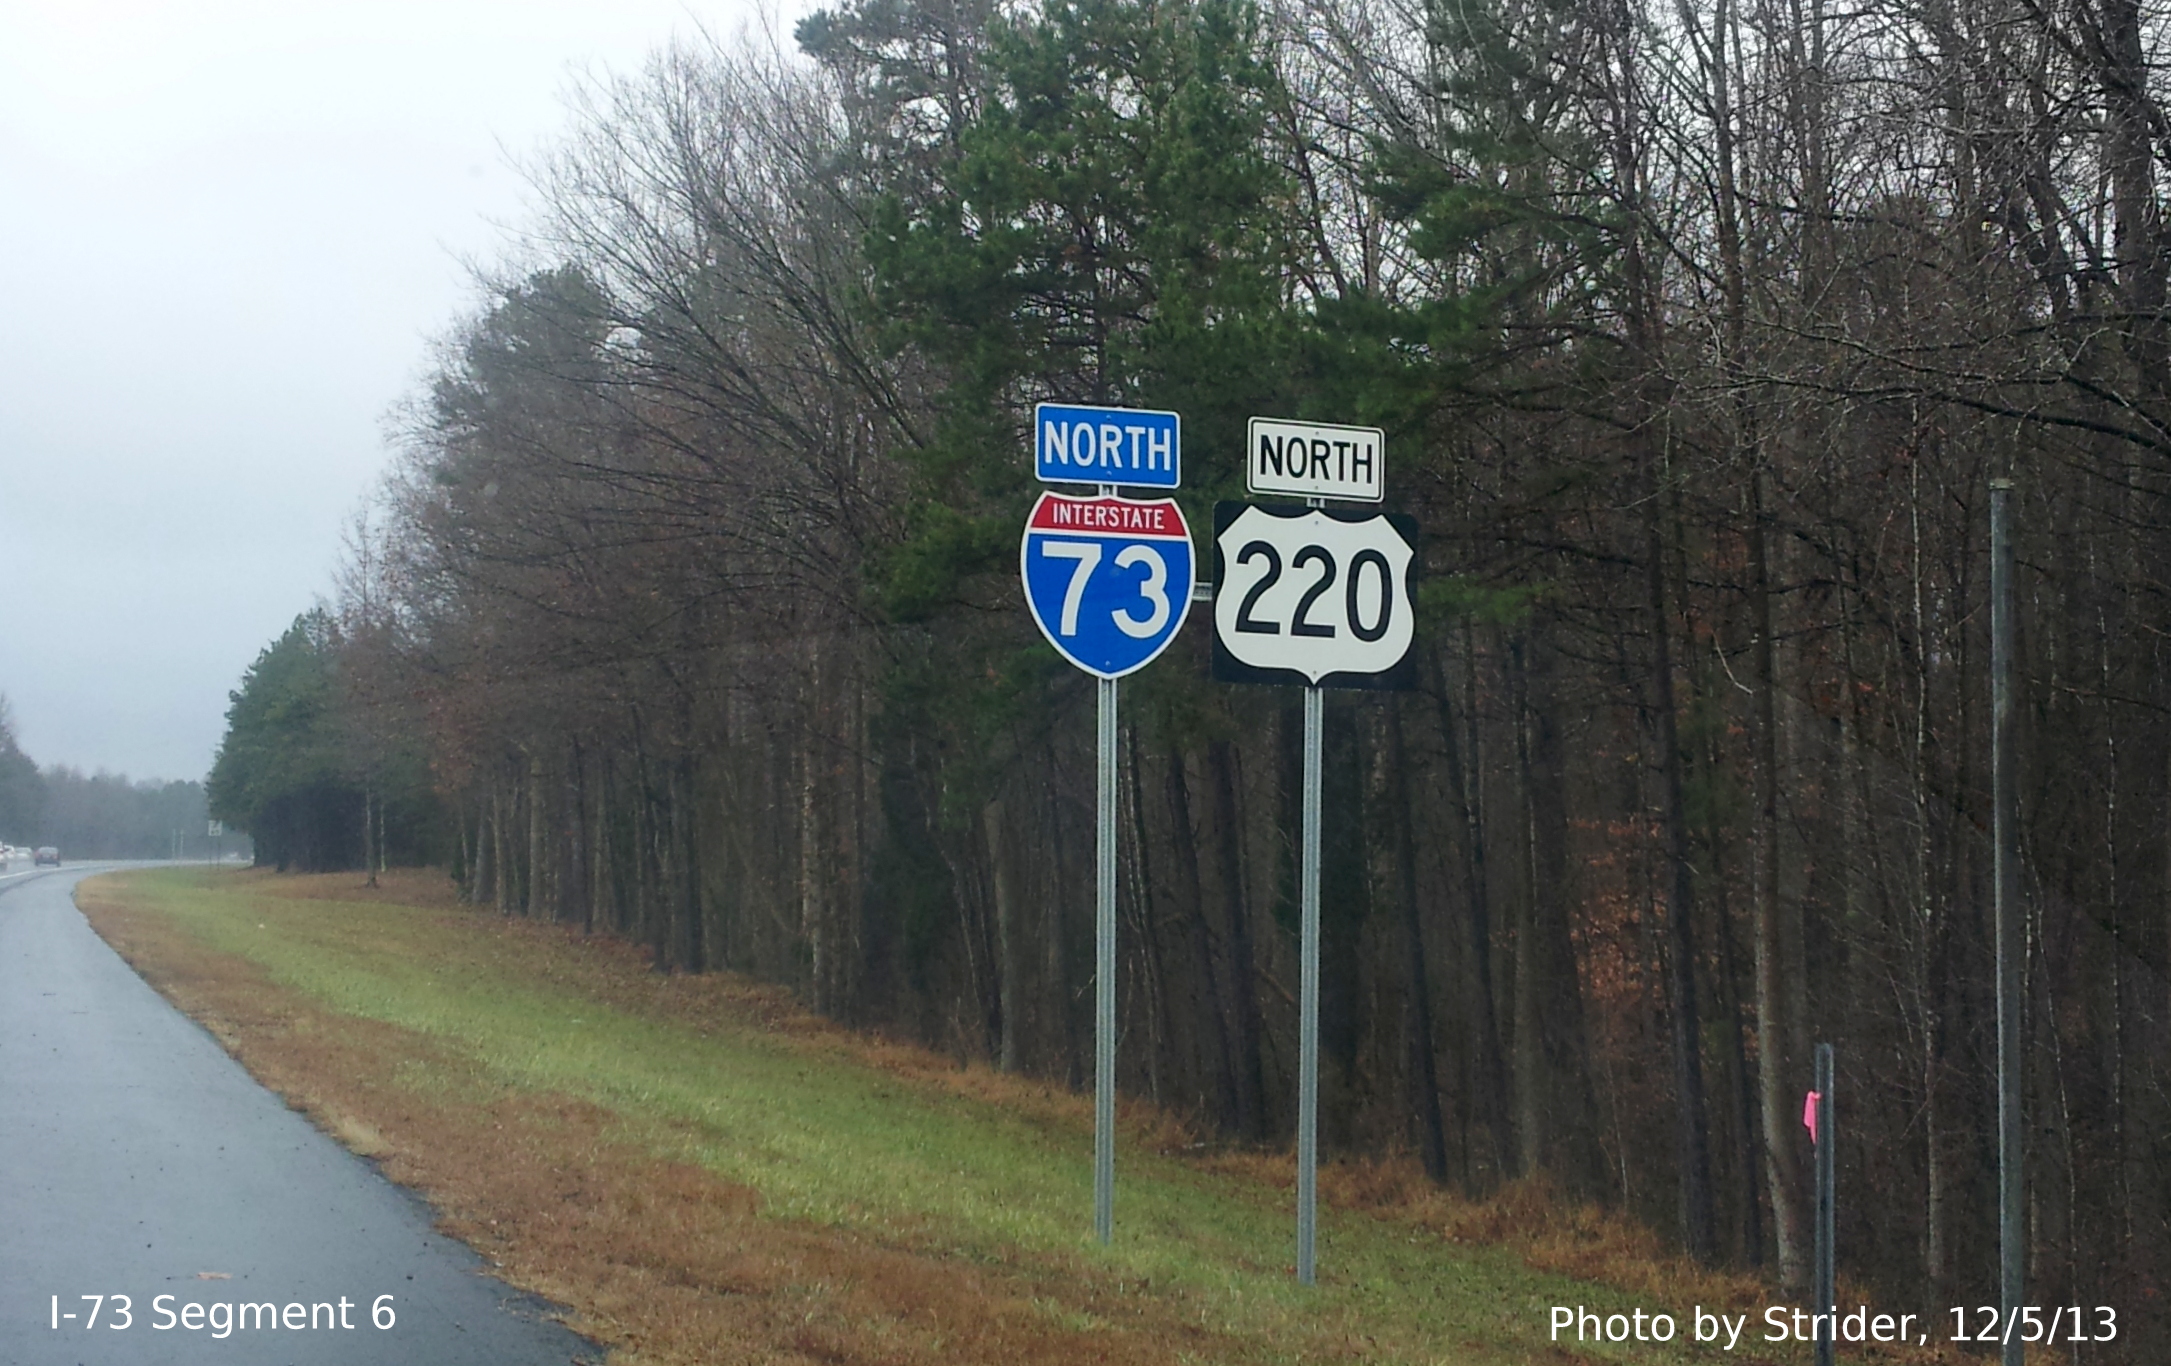 Photo of New I-73 shield
put up along US 220 North in Guilford County North of Old Randleman Rd Exit, Photo from Strider